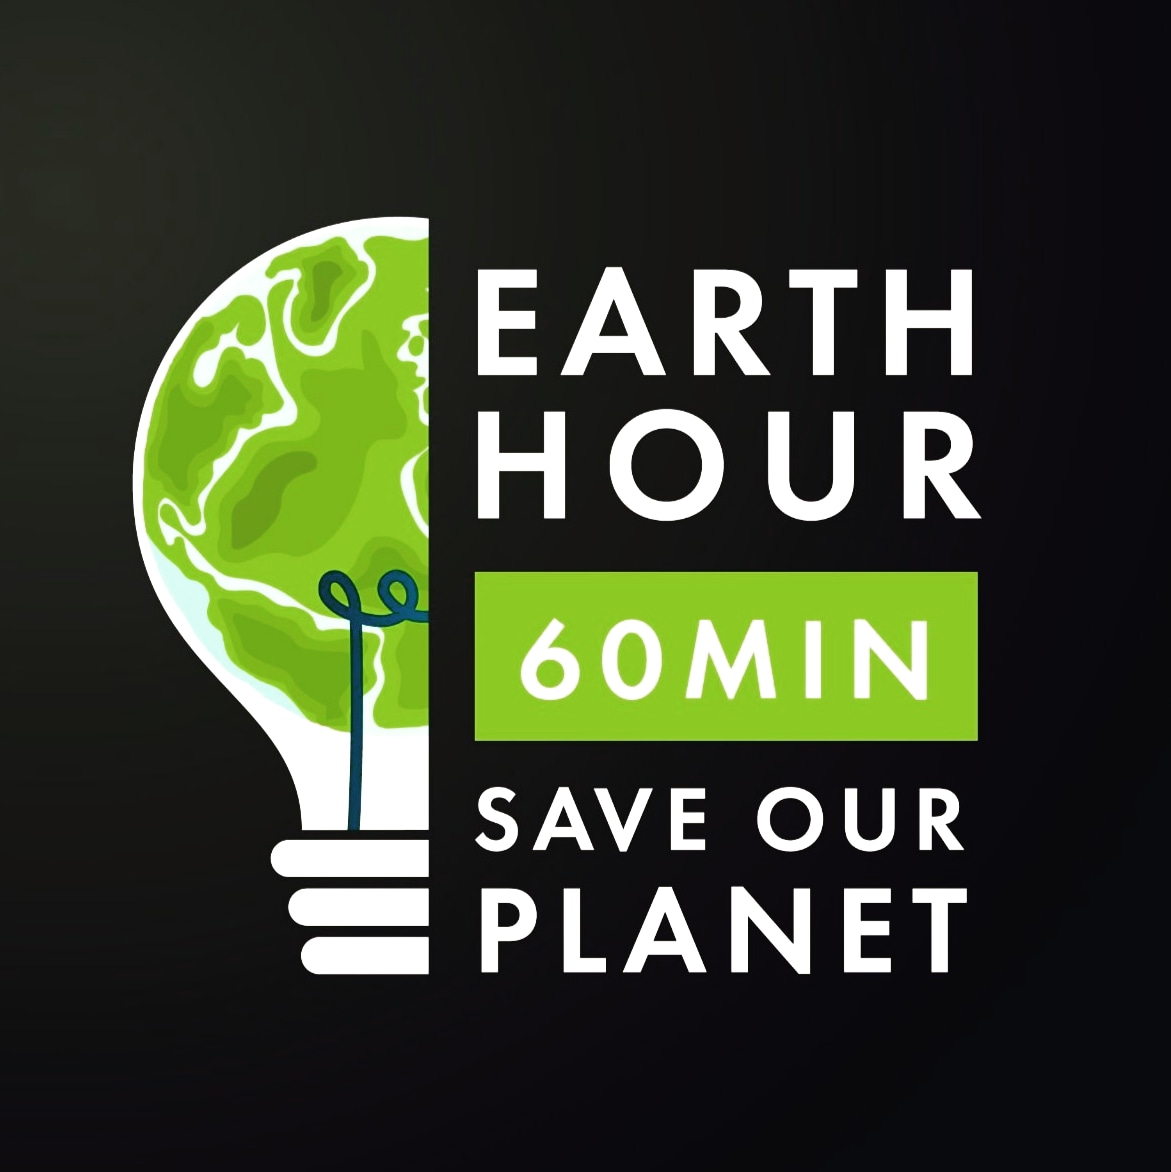 It's time to switch off the lights and take a moment to appreciate our beautiful planet! 🌍 🌿🕯️ 

#earthhour #climateaction #sustainability #savetheplanet #greenliving #protecttheearth #togetherwecan #consciousconsumerism #india